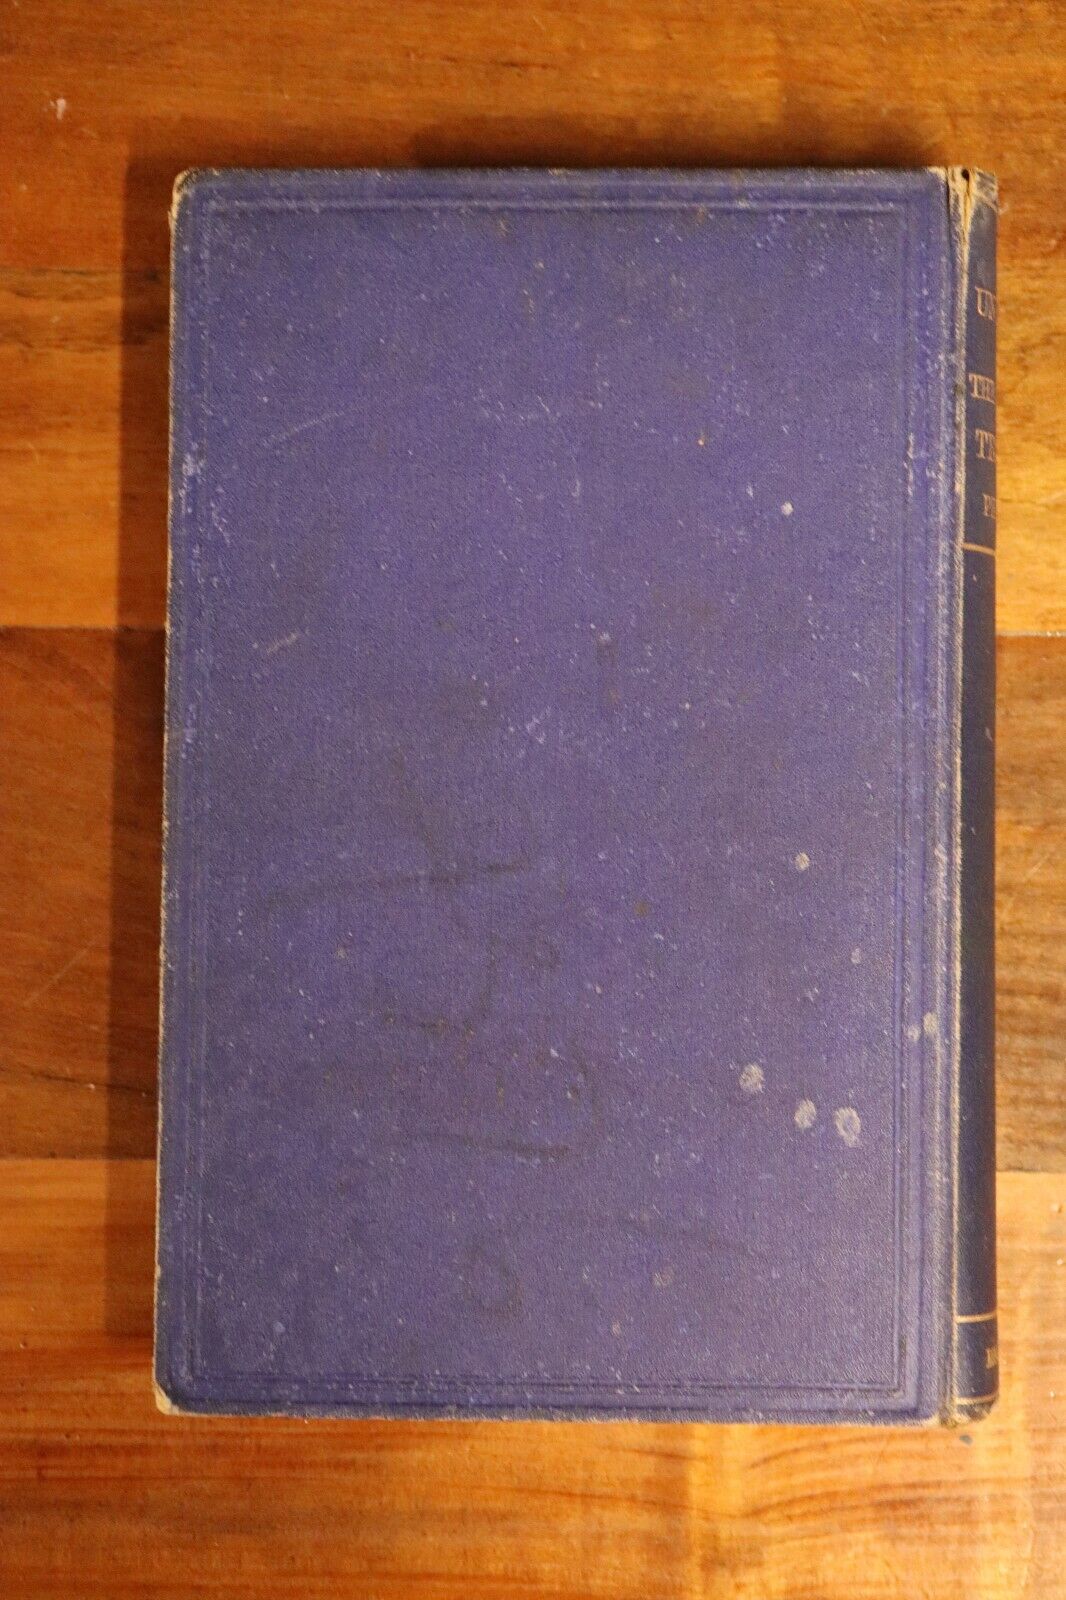 1874 The Universe & The Coming Transits by RA Proctor Antique Astronomy Book